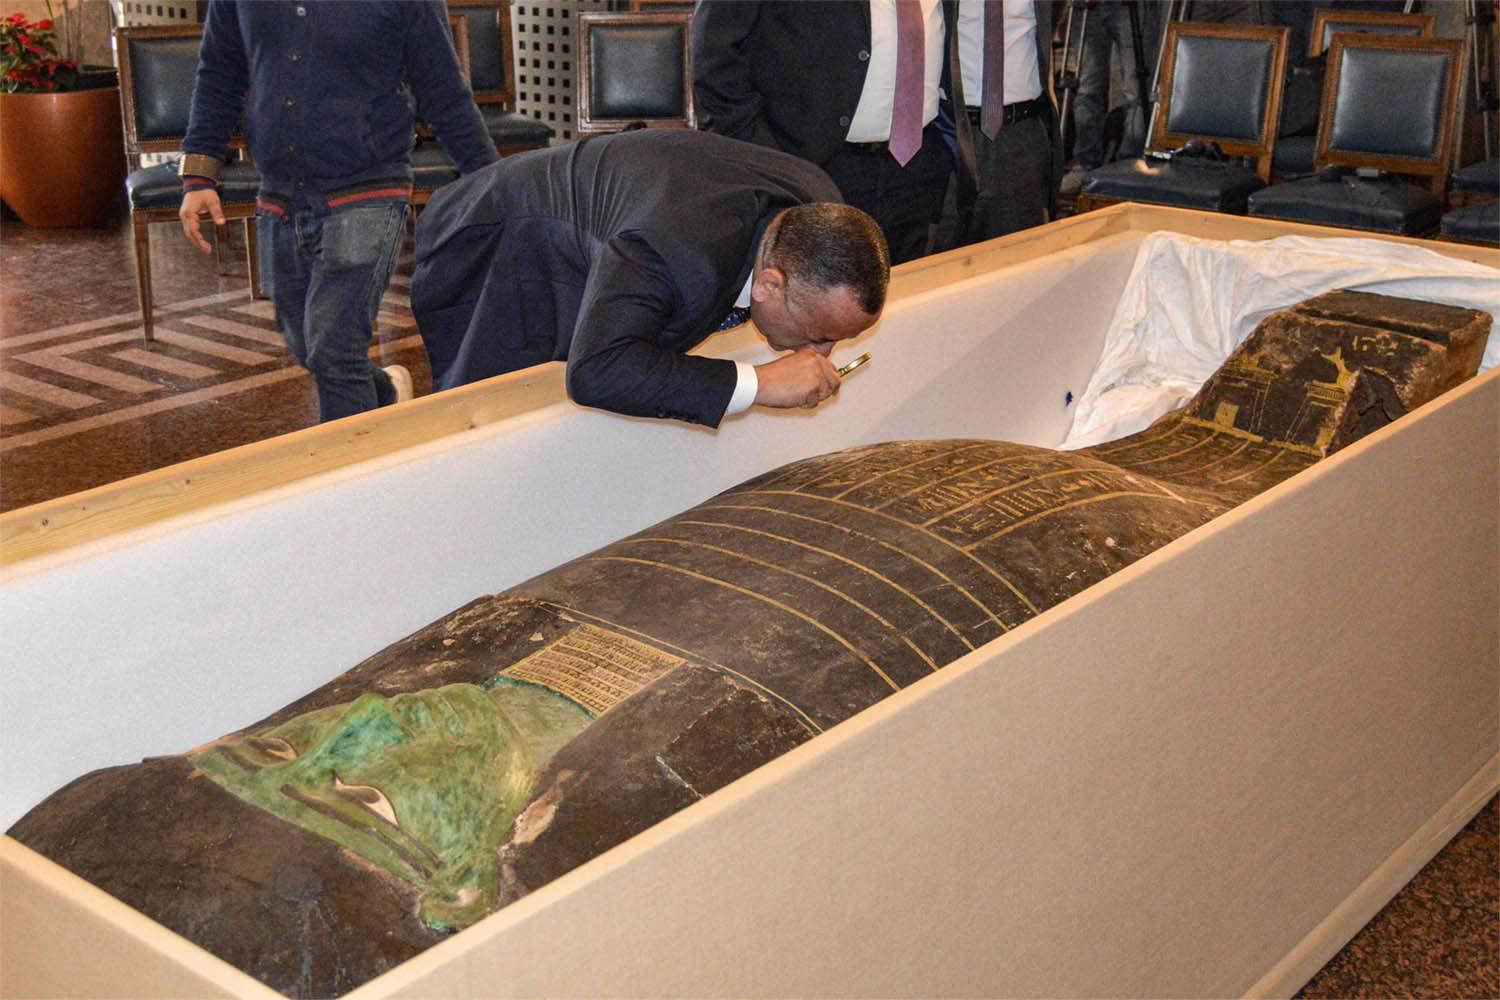 The sarcophagus is almost 3 meters tall 